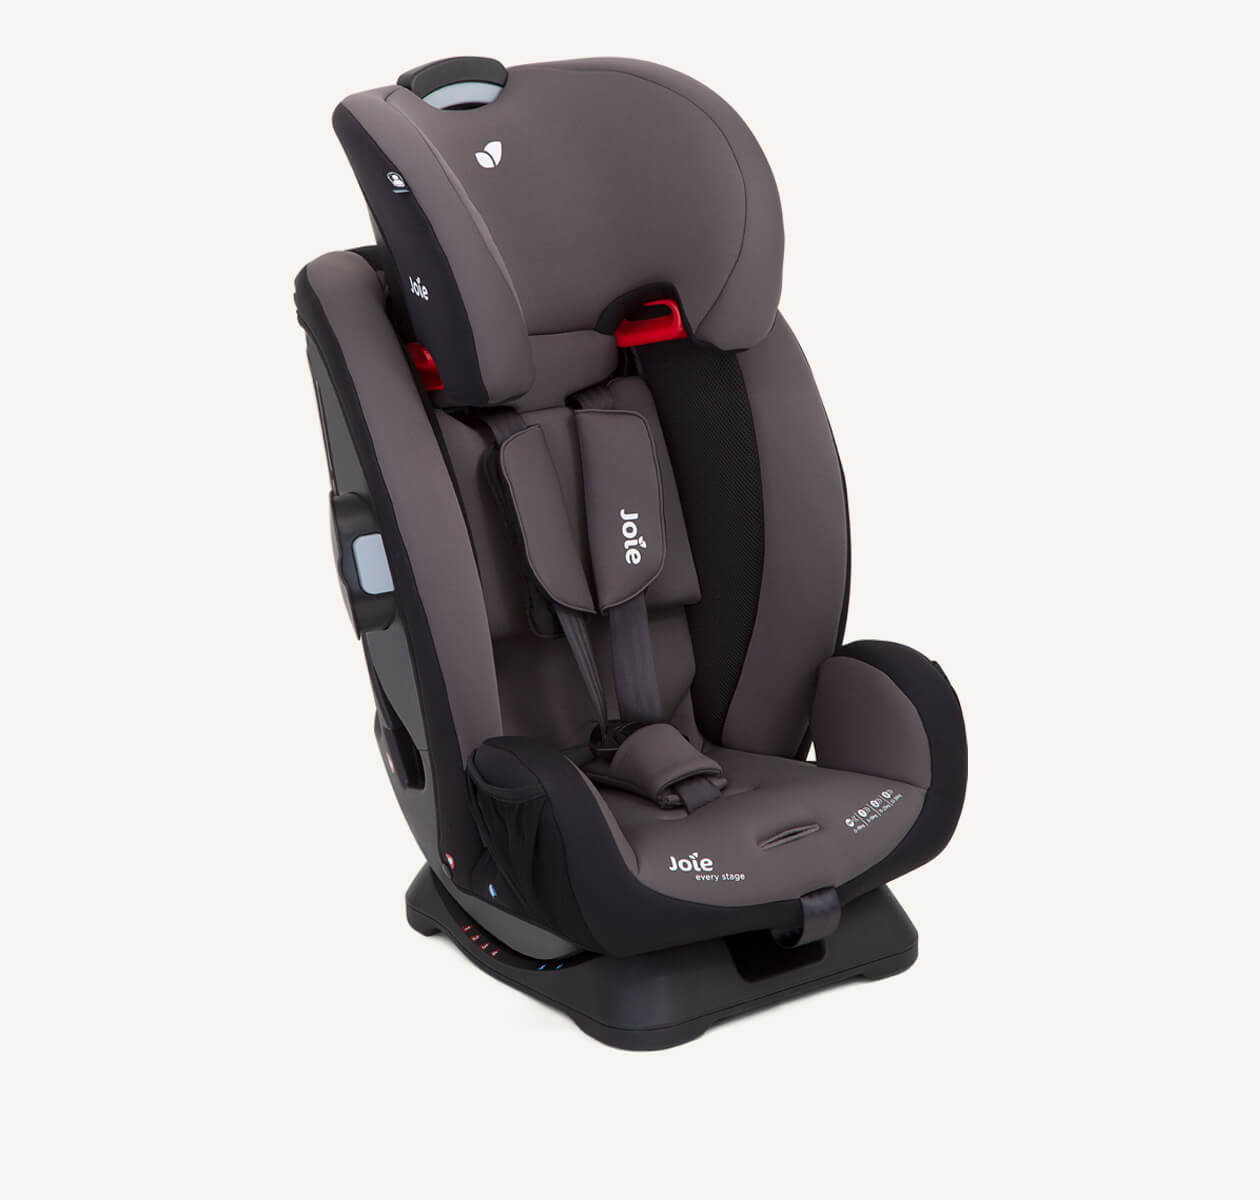 https://dd.joiebaby.com/media/catalog/product/p/1/p1-joie-toddler-child-car-seat-everystage-ember-right-angle.jpg?type=product&height=265&width=265